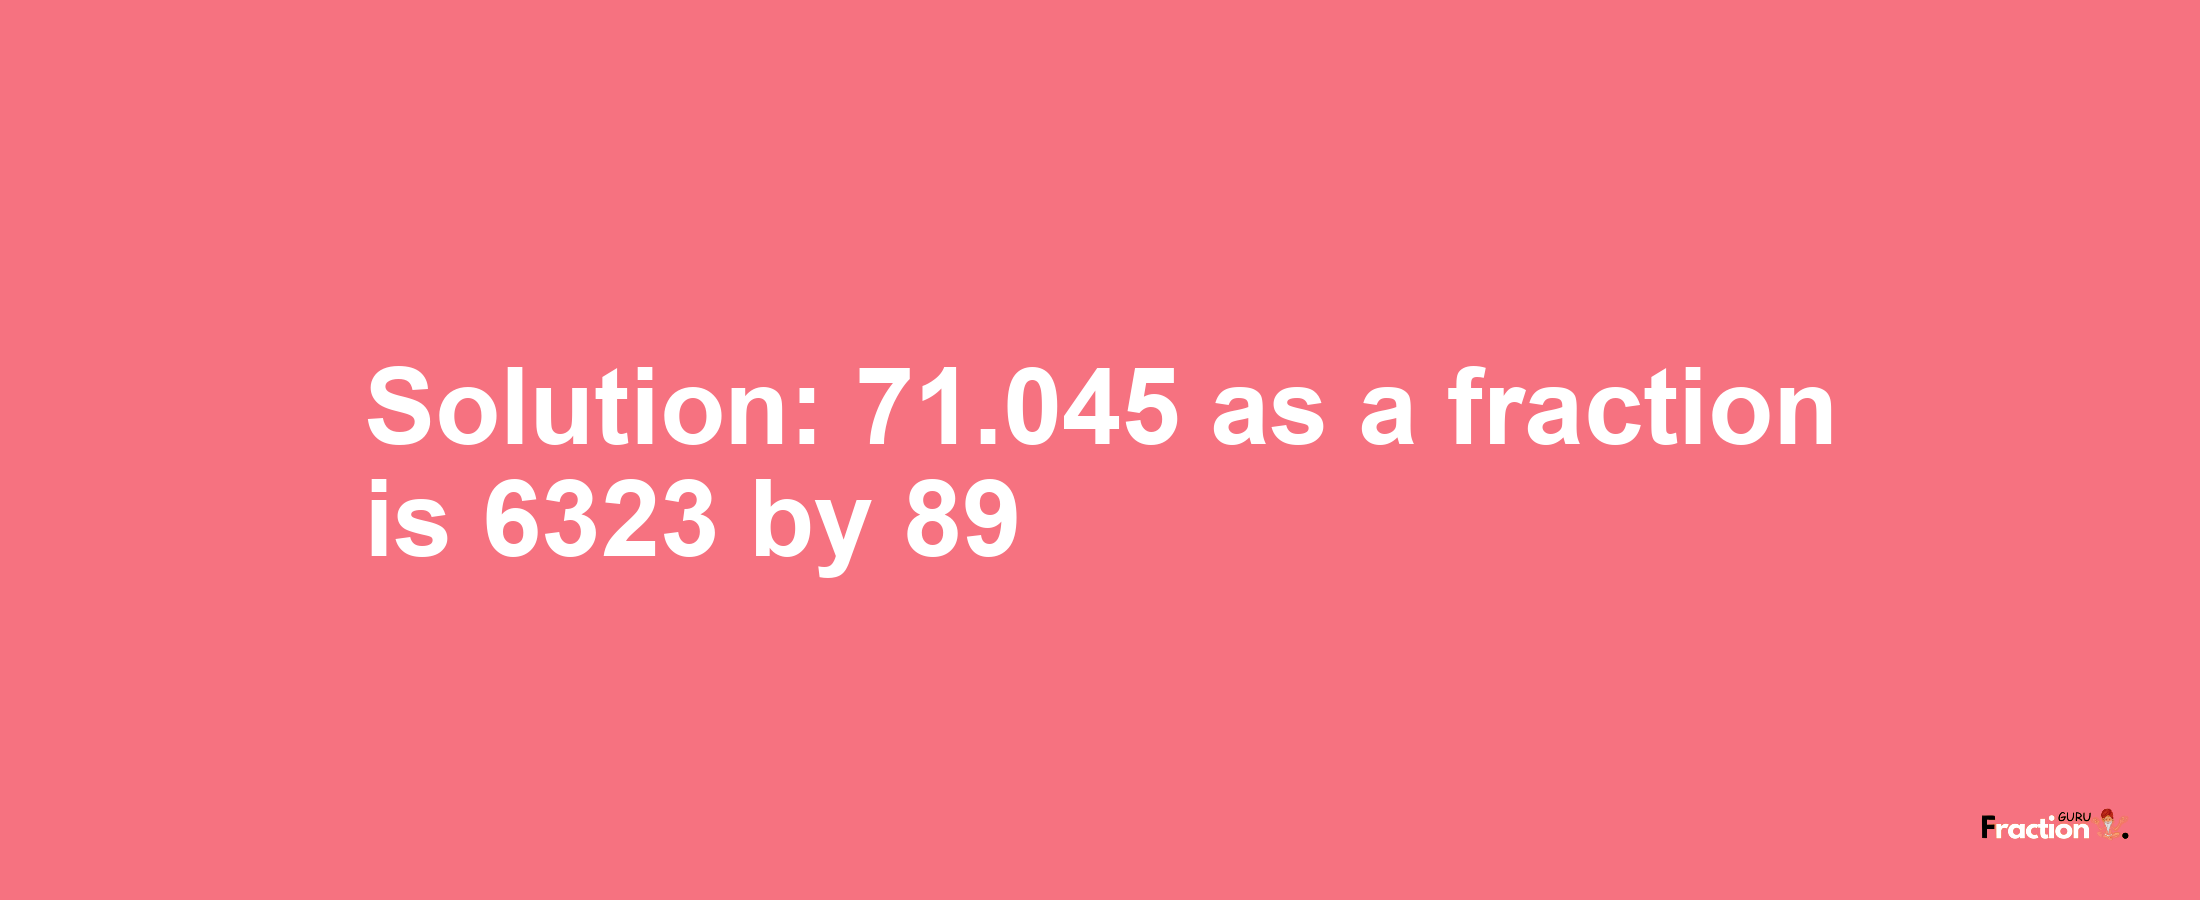 Solution:71.045 as a fraction is 6323/89